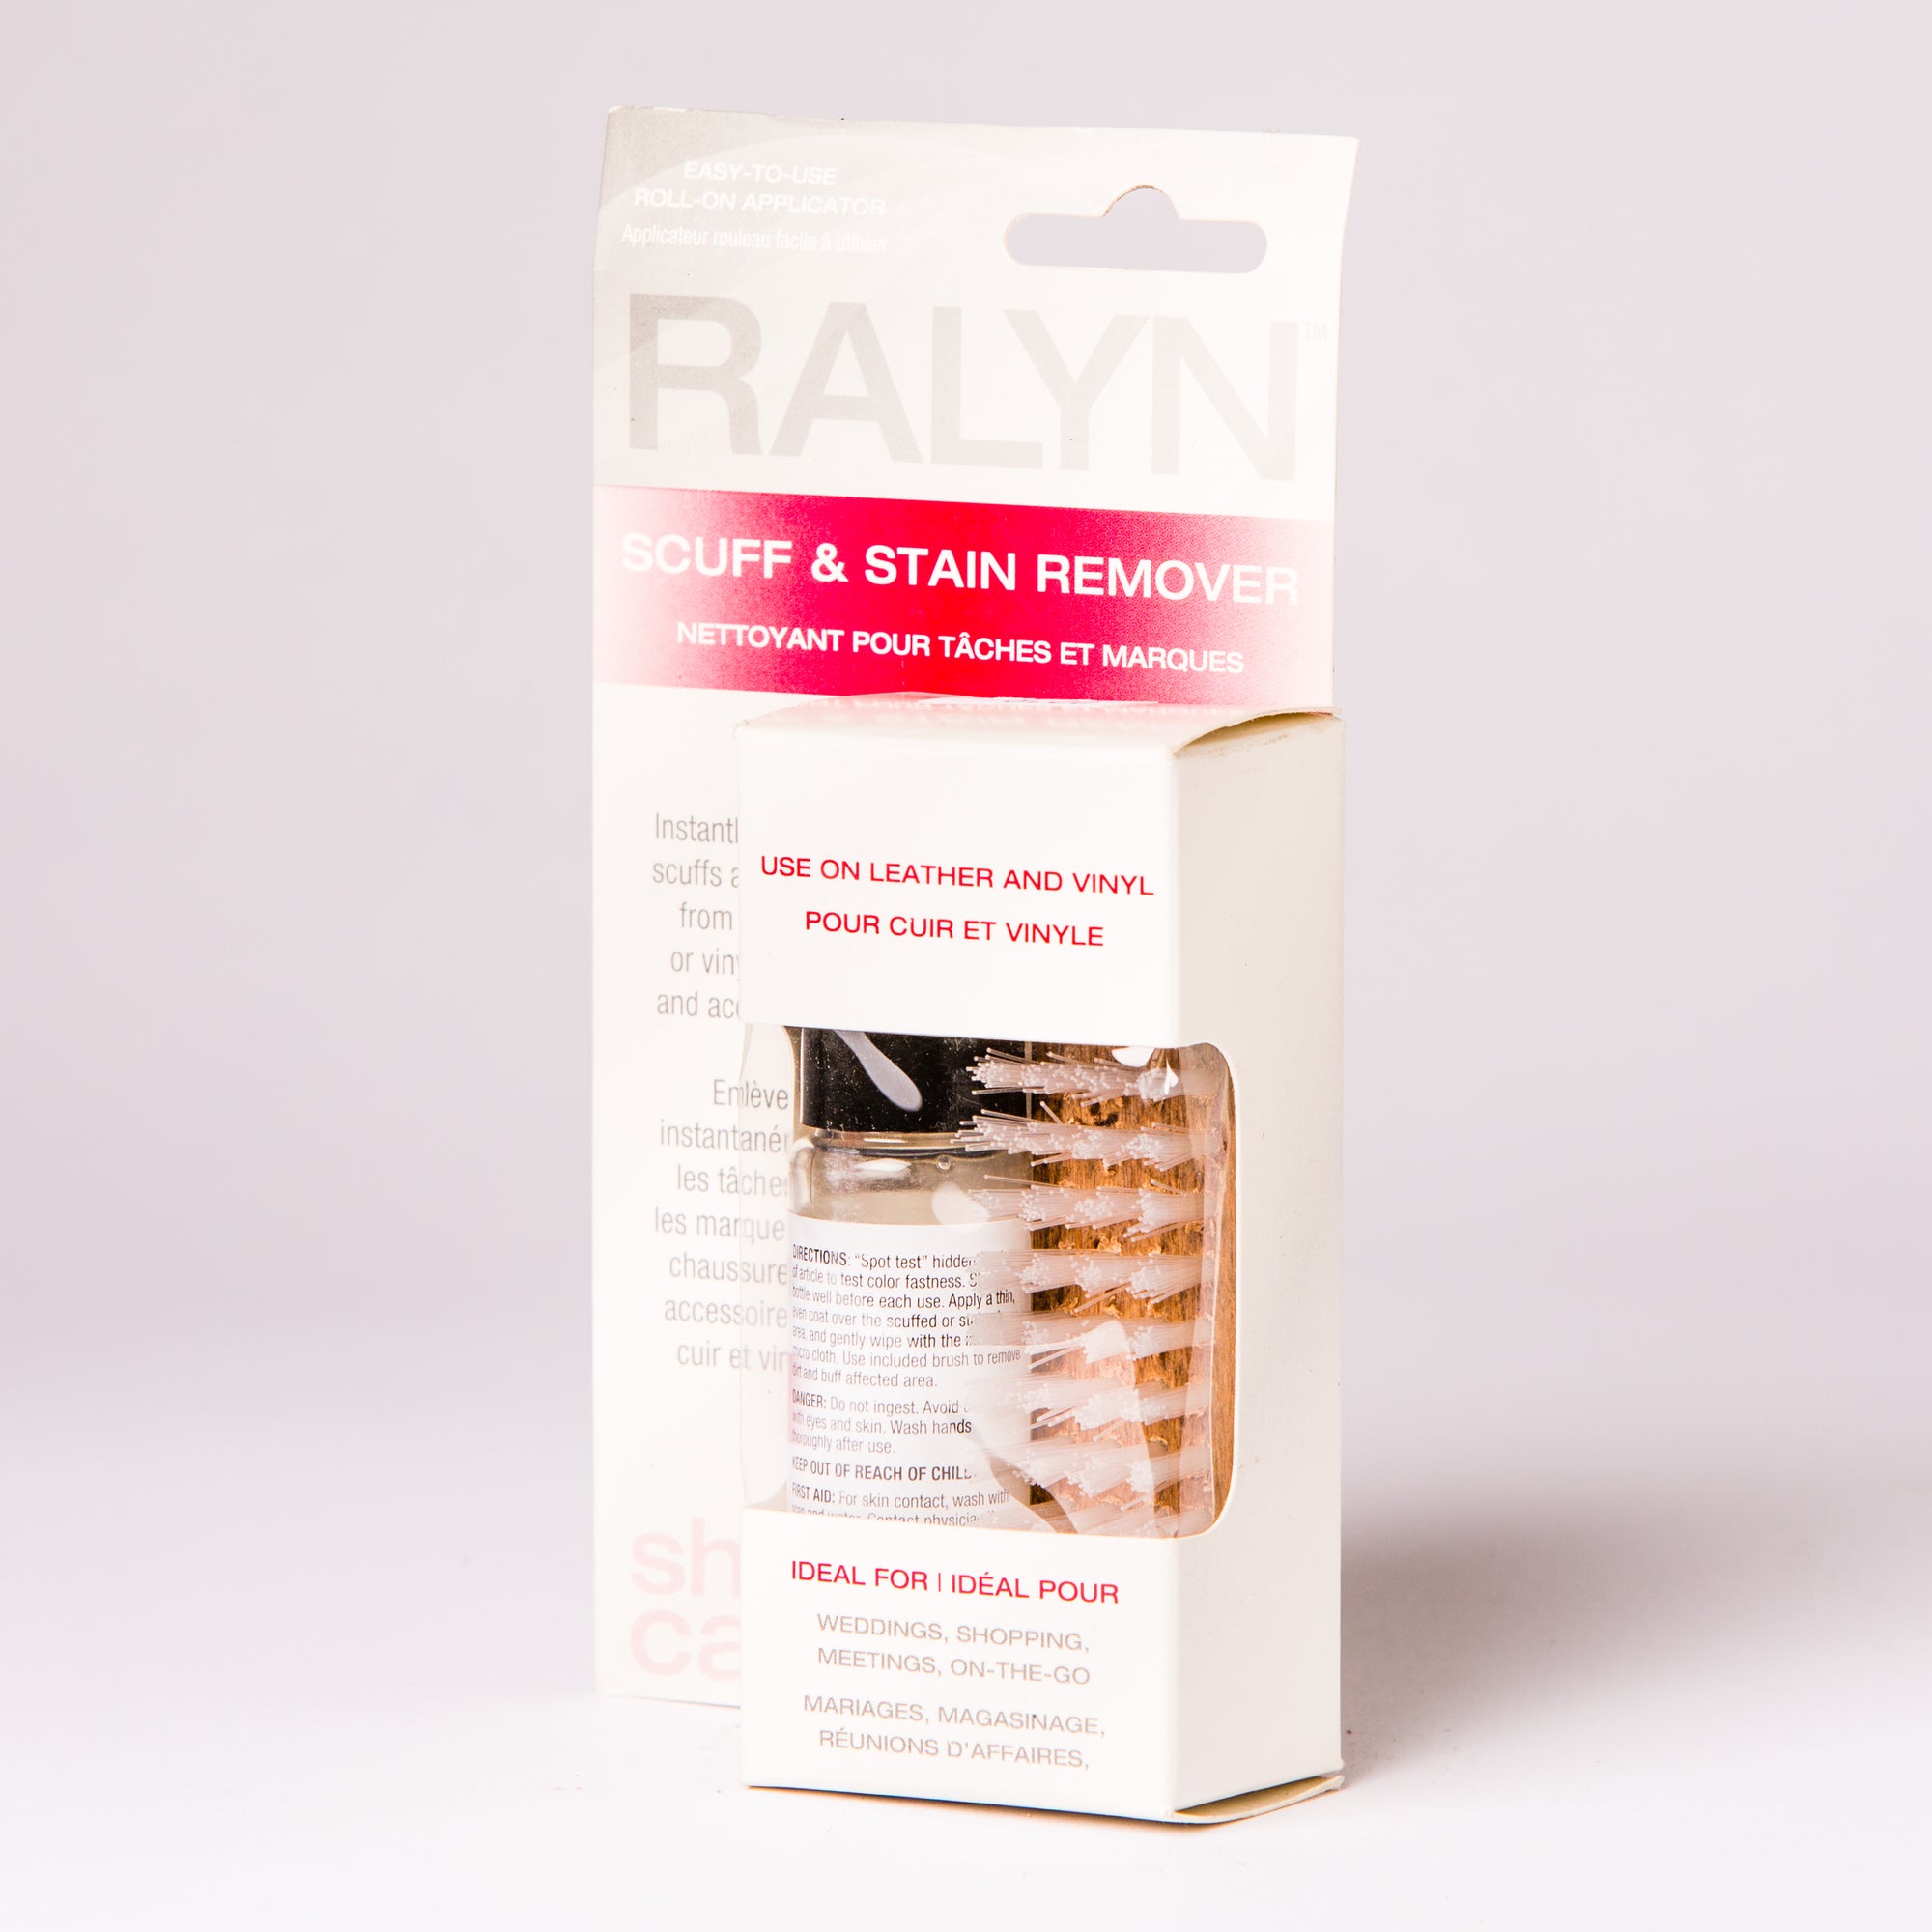 Ralyn Scuff and Stain Remover